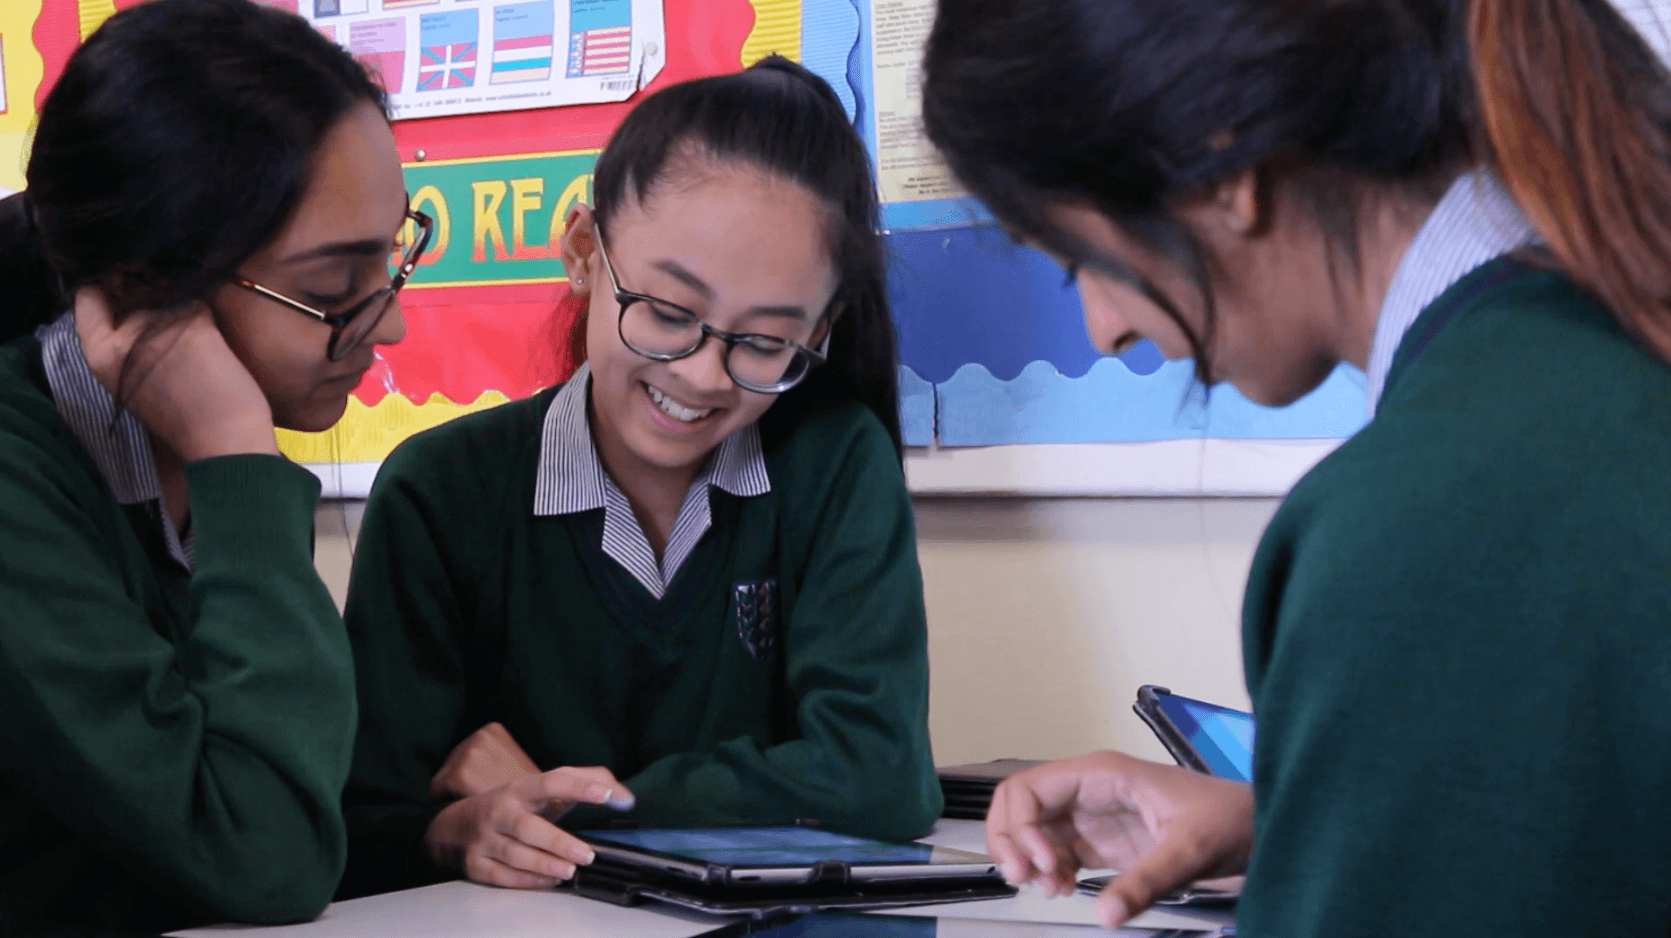 Motivated EAL learners using FlashAcademy